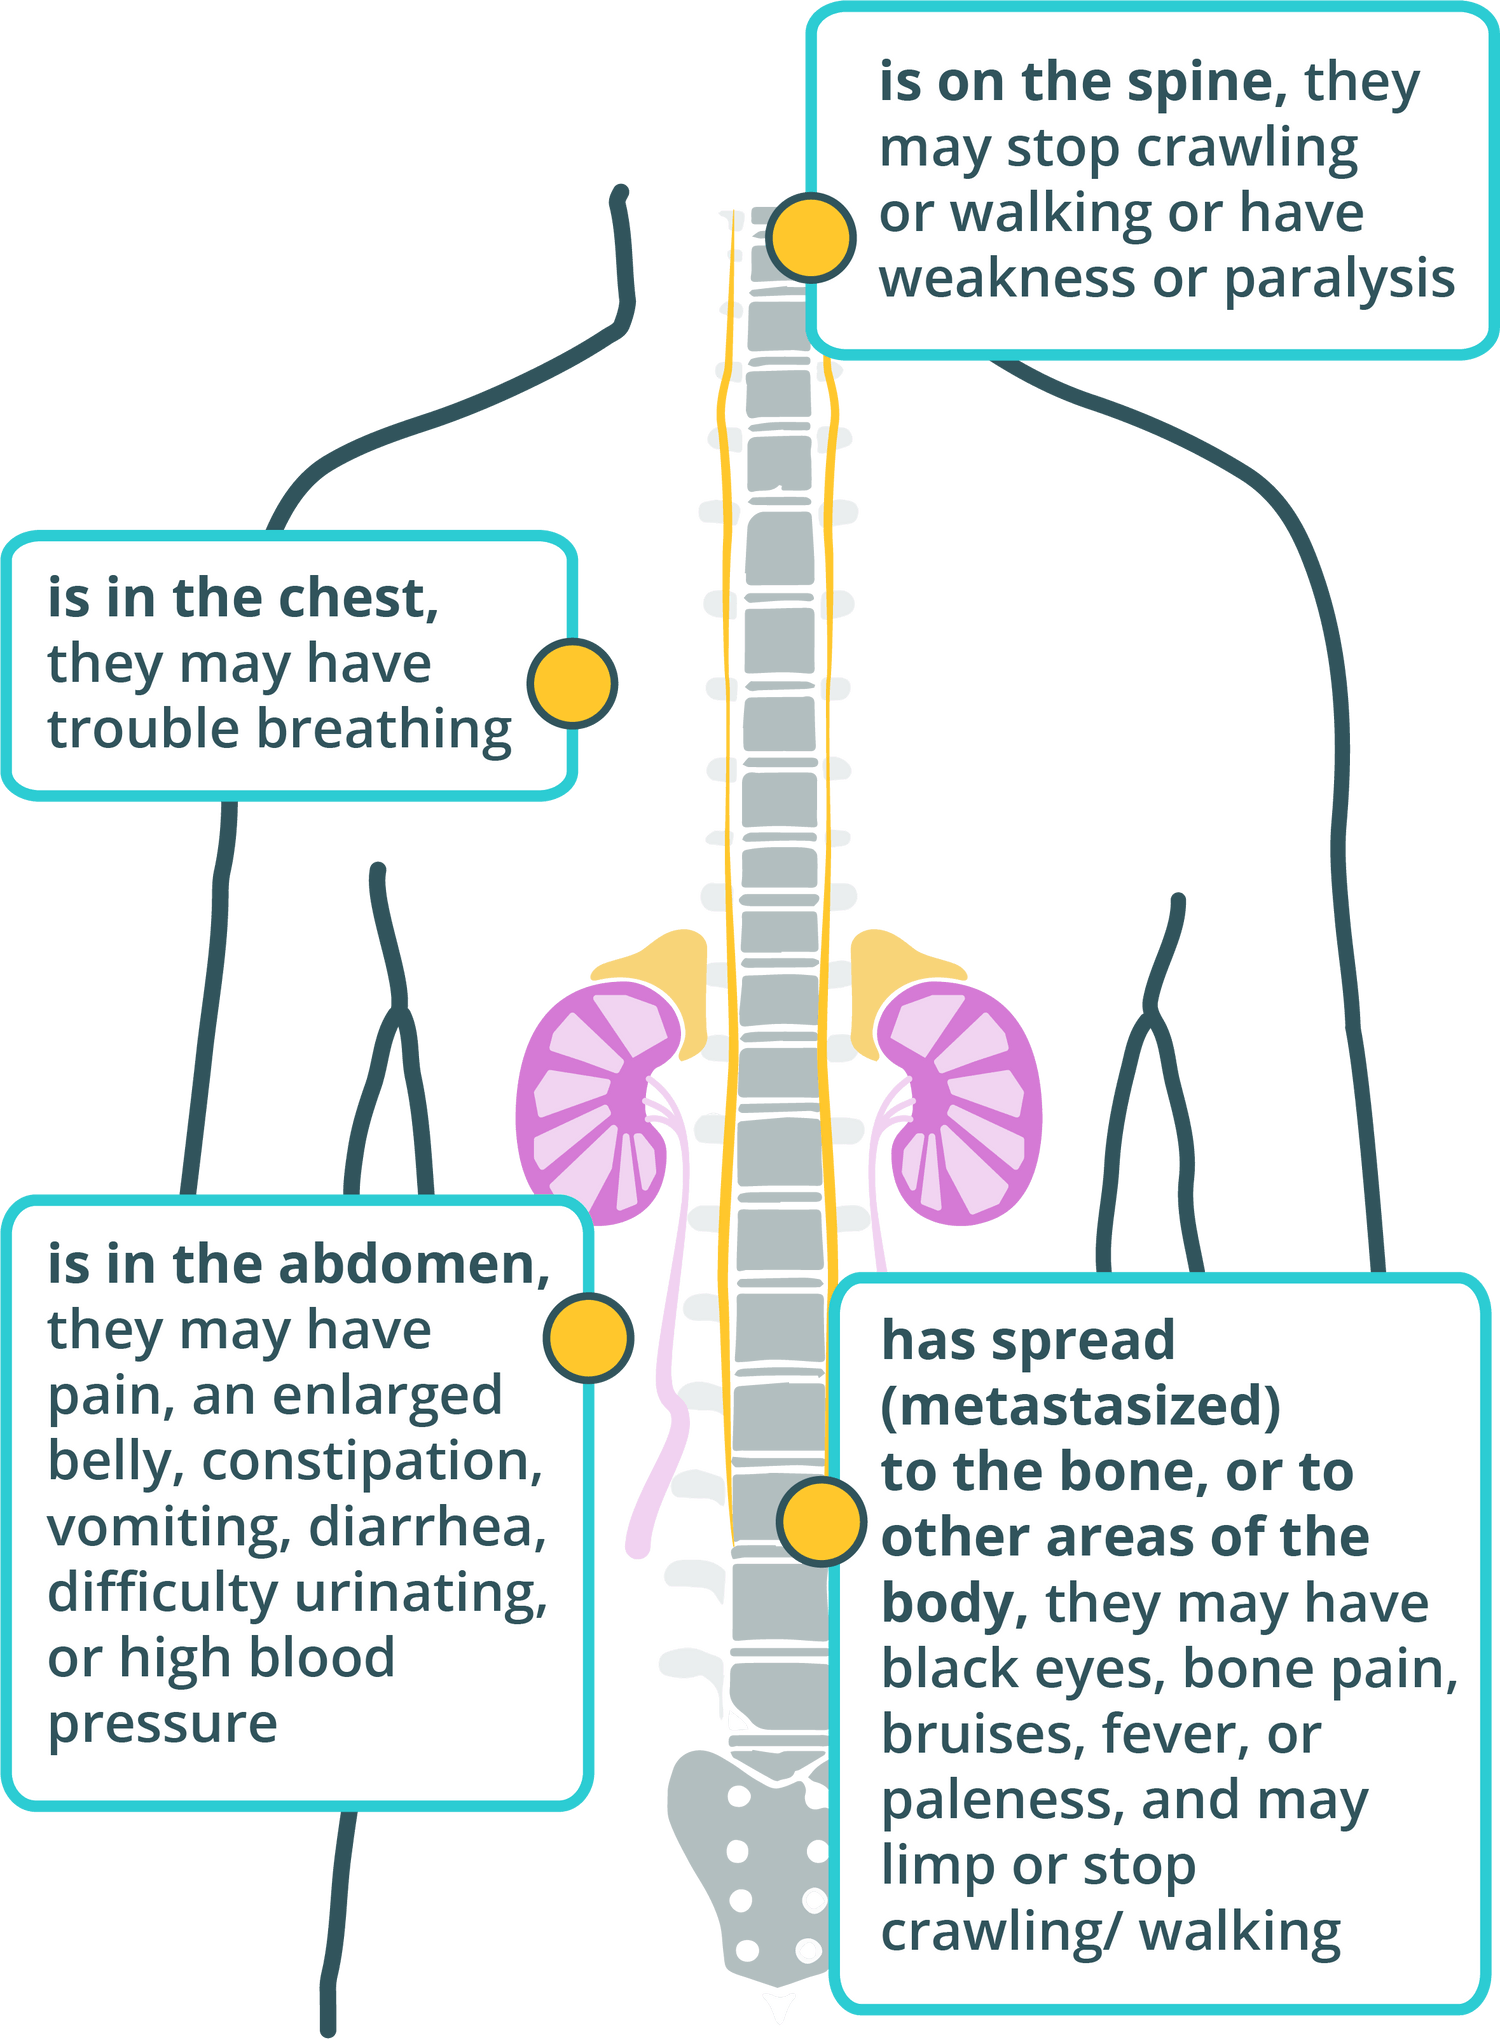 is on the spine, they may stop crawling or walking or have weakness or paralysis. If a child has a tumor that is in the chest, they may have trouble breathing. If a child has a tumor that is in the abdomen, they may have pain, an enlarged belly, constipation, vomiting, diarrhea, difficulty urinating, or high blood pressure. If a child has a tumor that has spread (metastasized) to the bone, or to other areas of the body, they may have black eyes, bone pain, bruises, fever, or paleness, and may limp or stop crawling or walking.